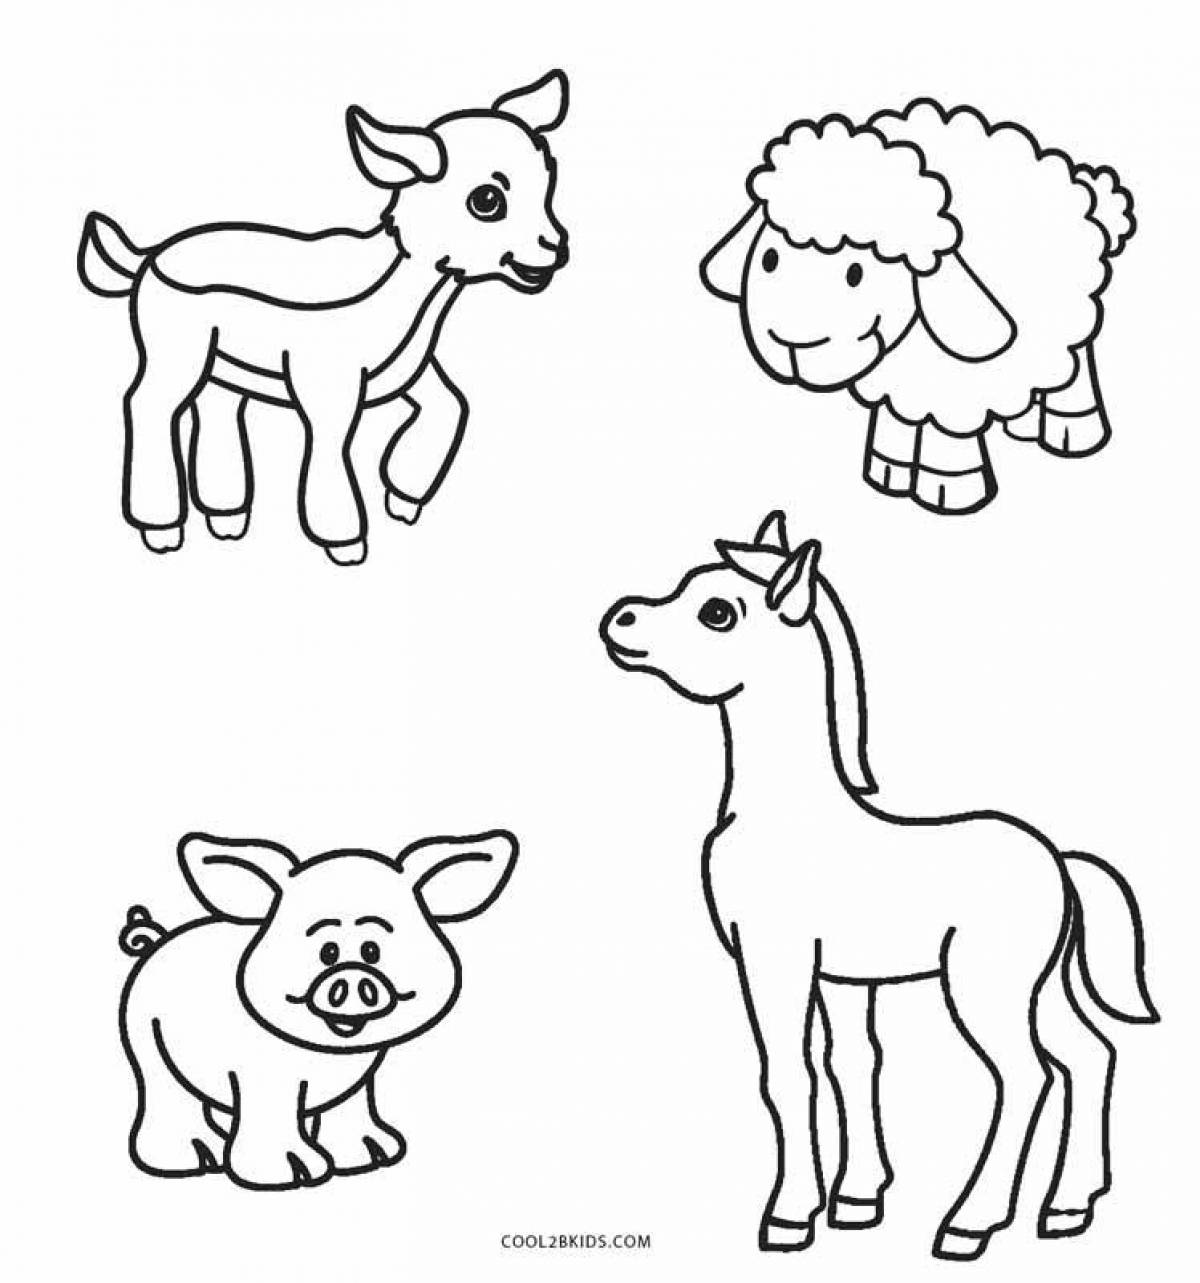 Invitation coloring pages of pets for children 6-7 years old